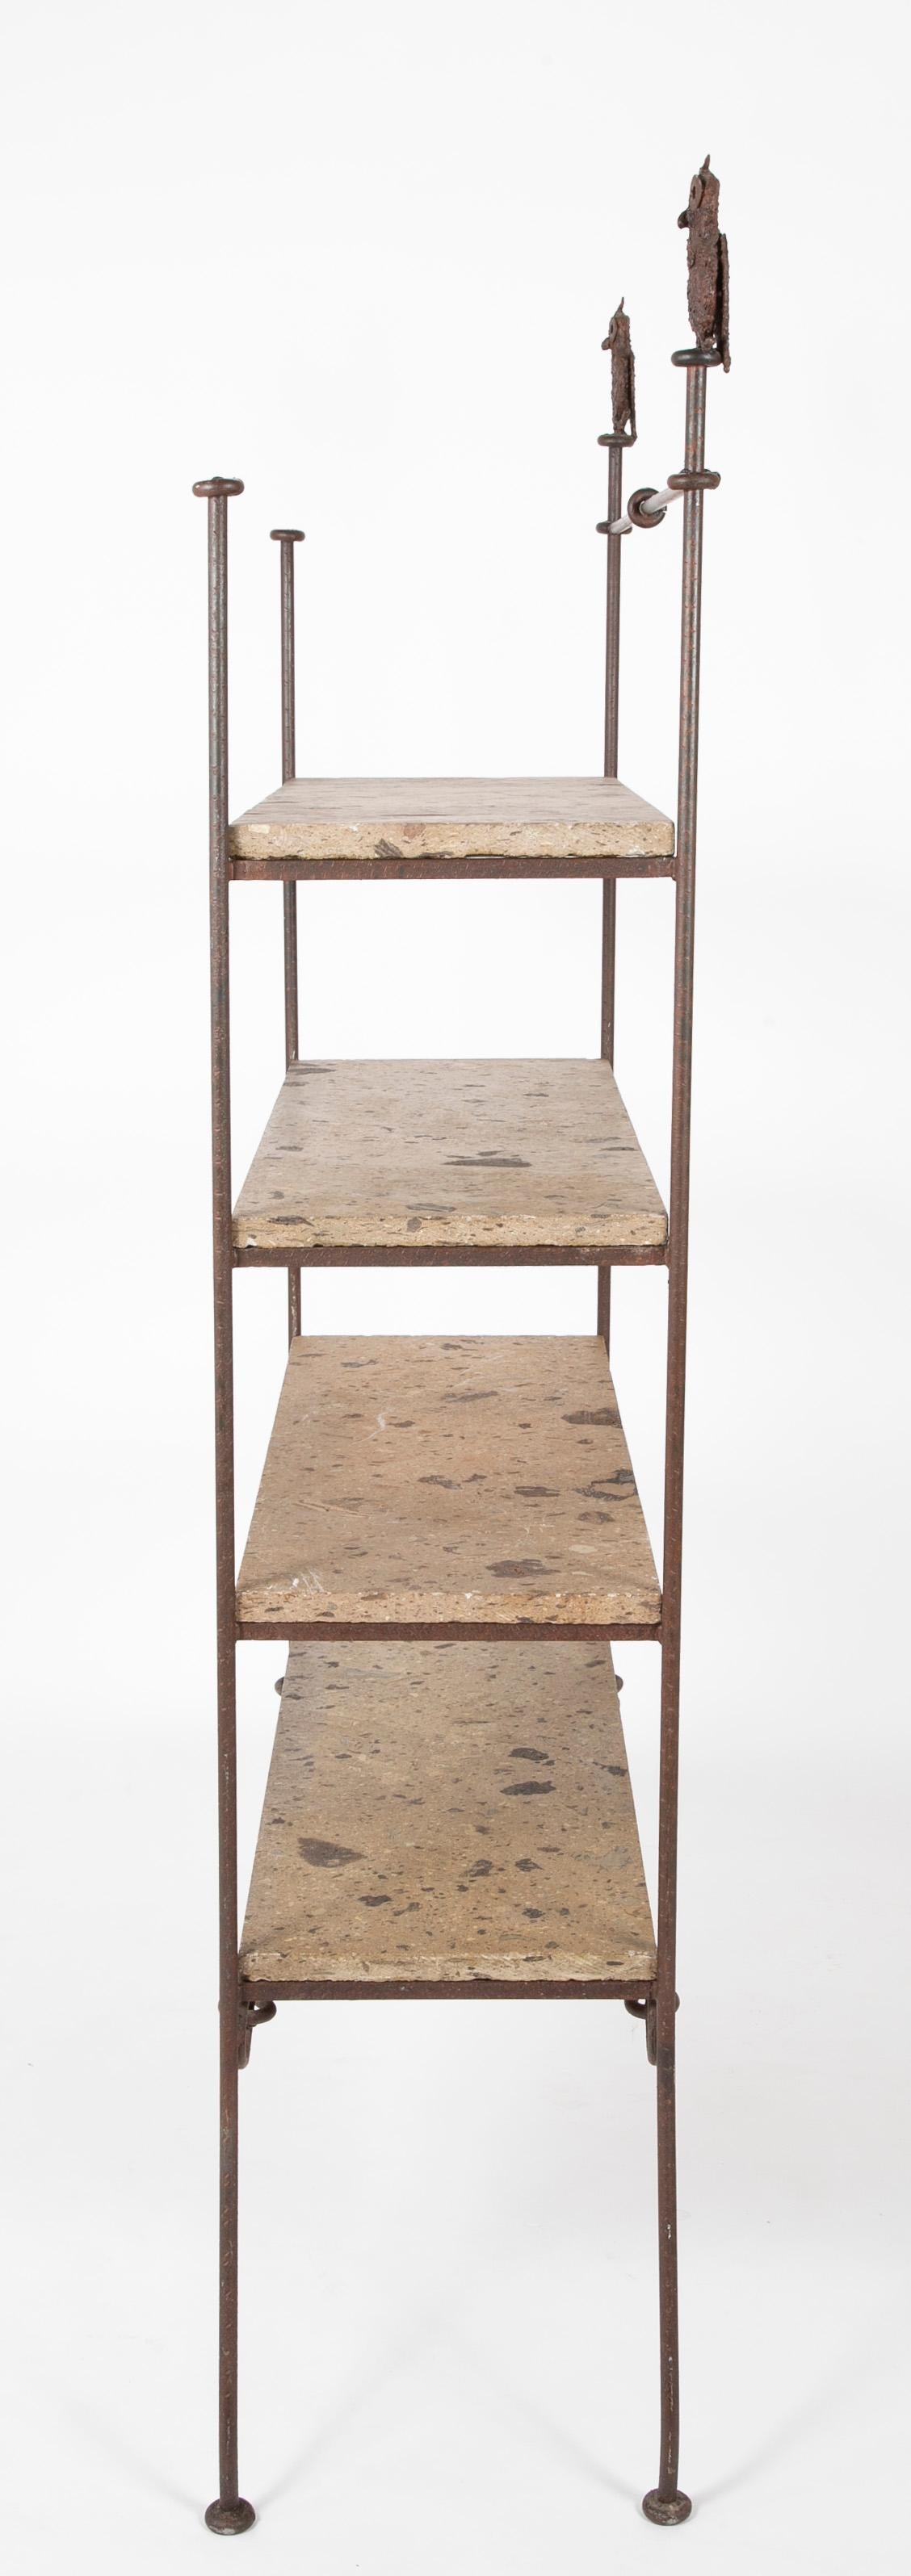 Patinated Diego Giacometti Style Wrought Iron and Stone Book Shelves